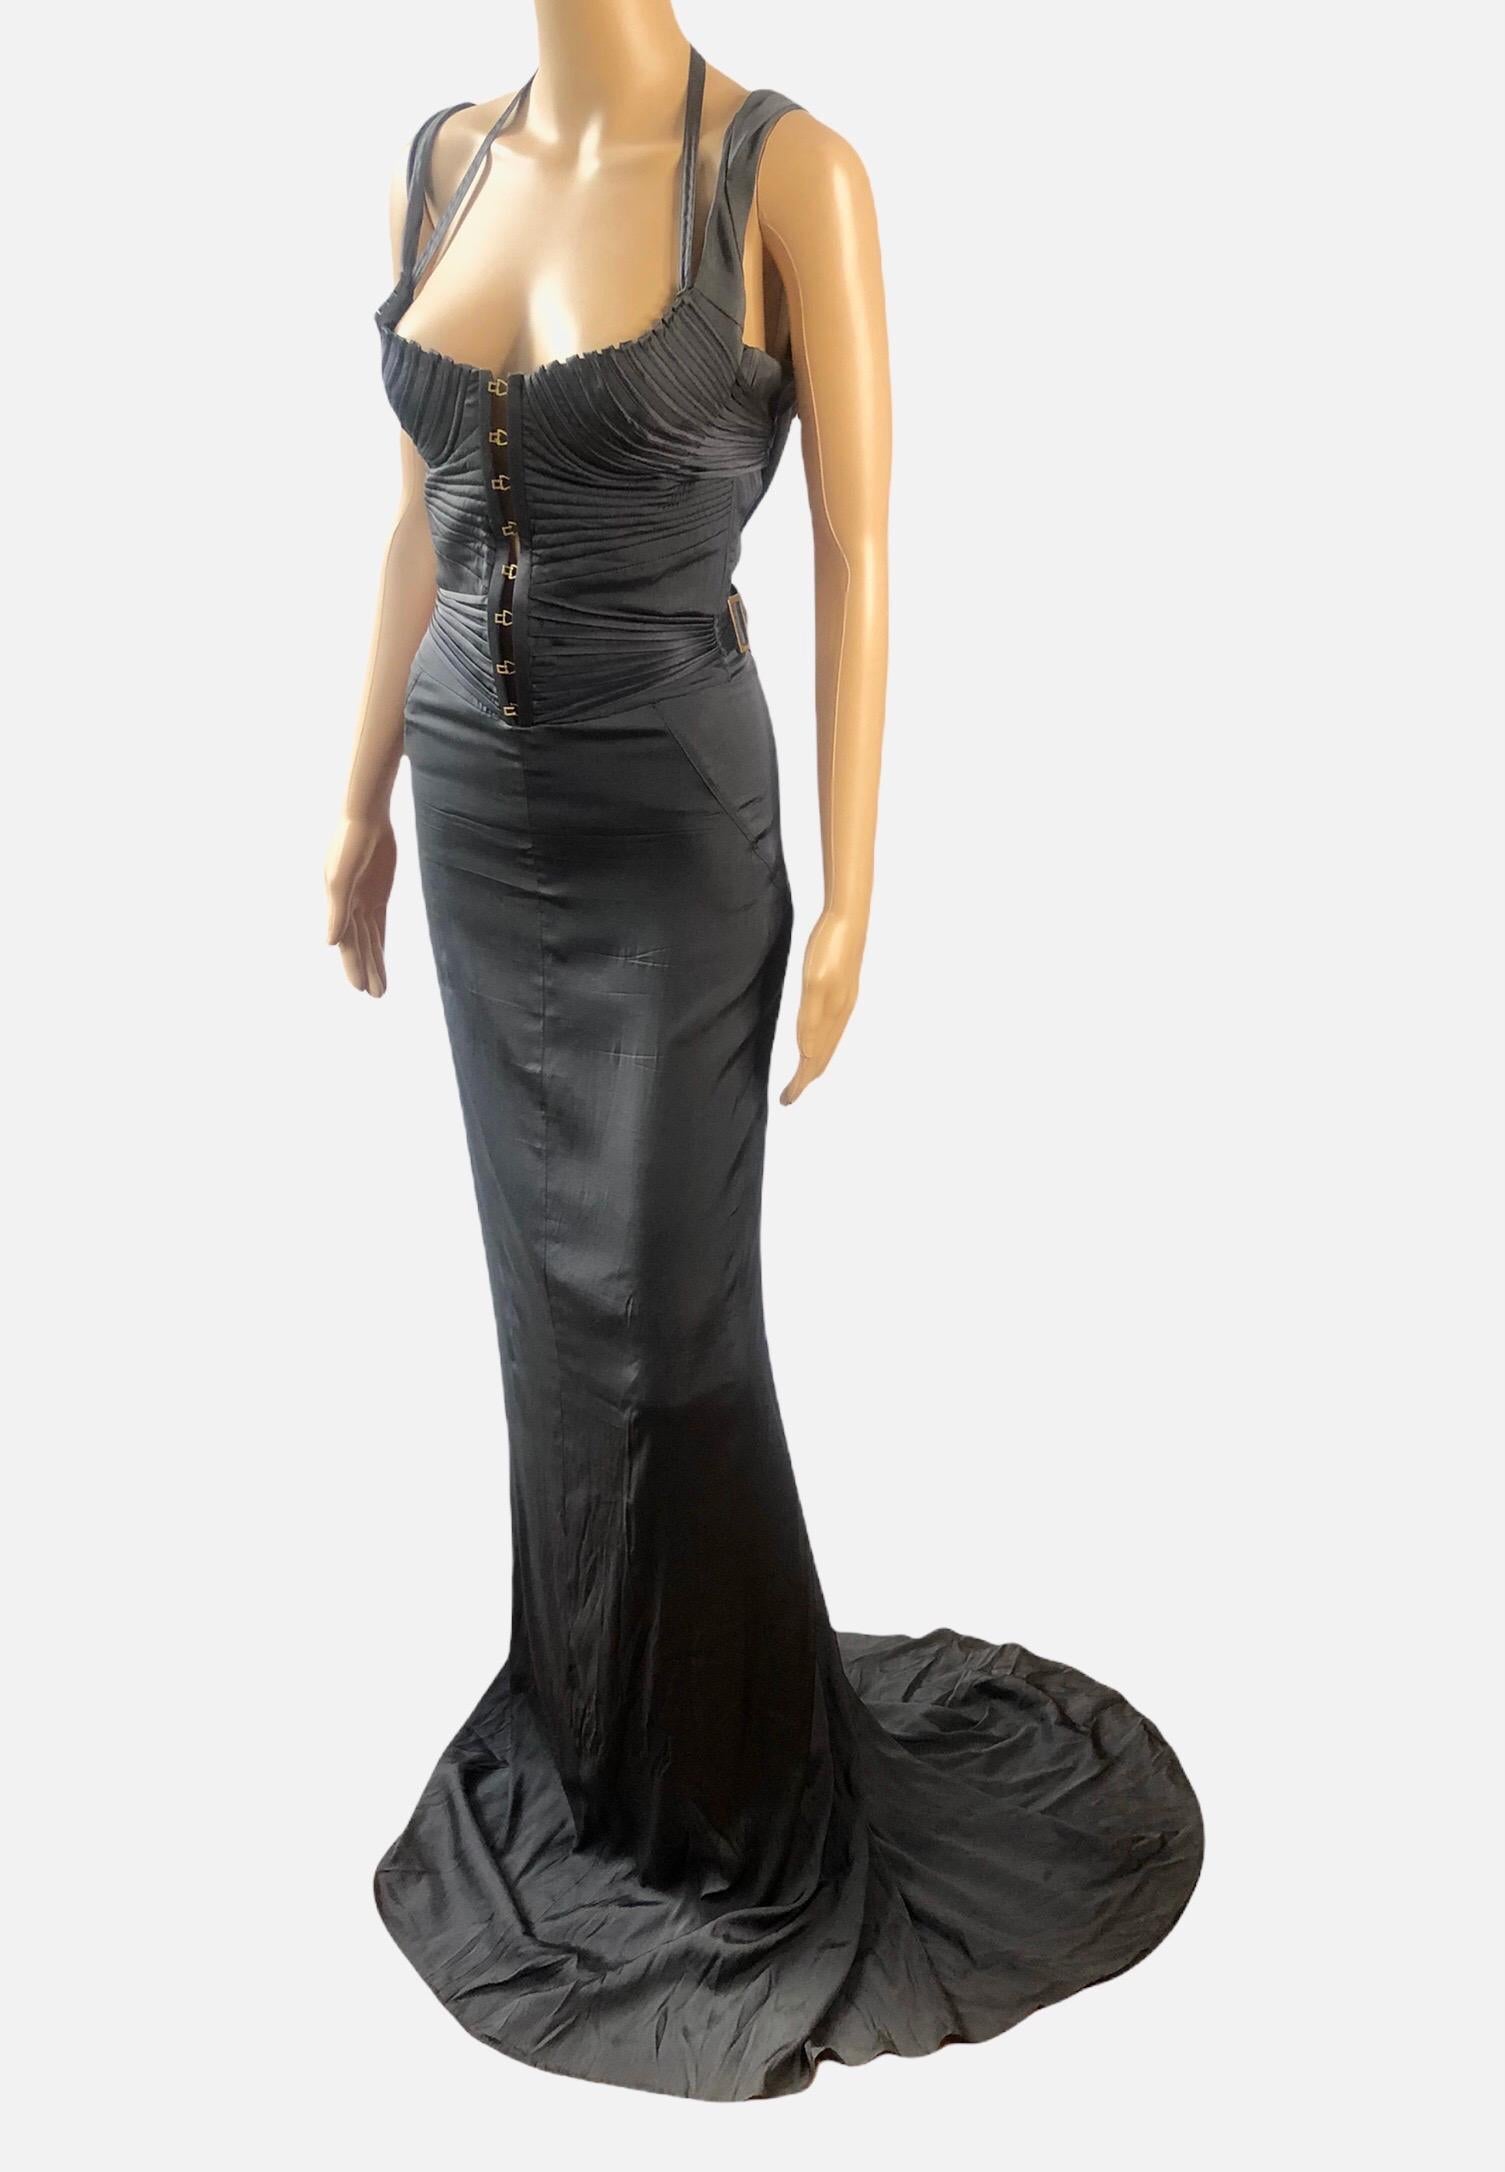 Tom Ford for Gucci F/W 2003 Bustier Corset Silk Evening Dress Gown 6